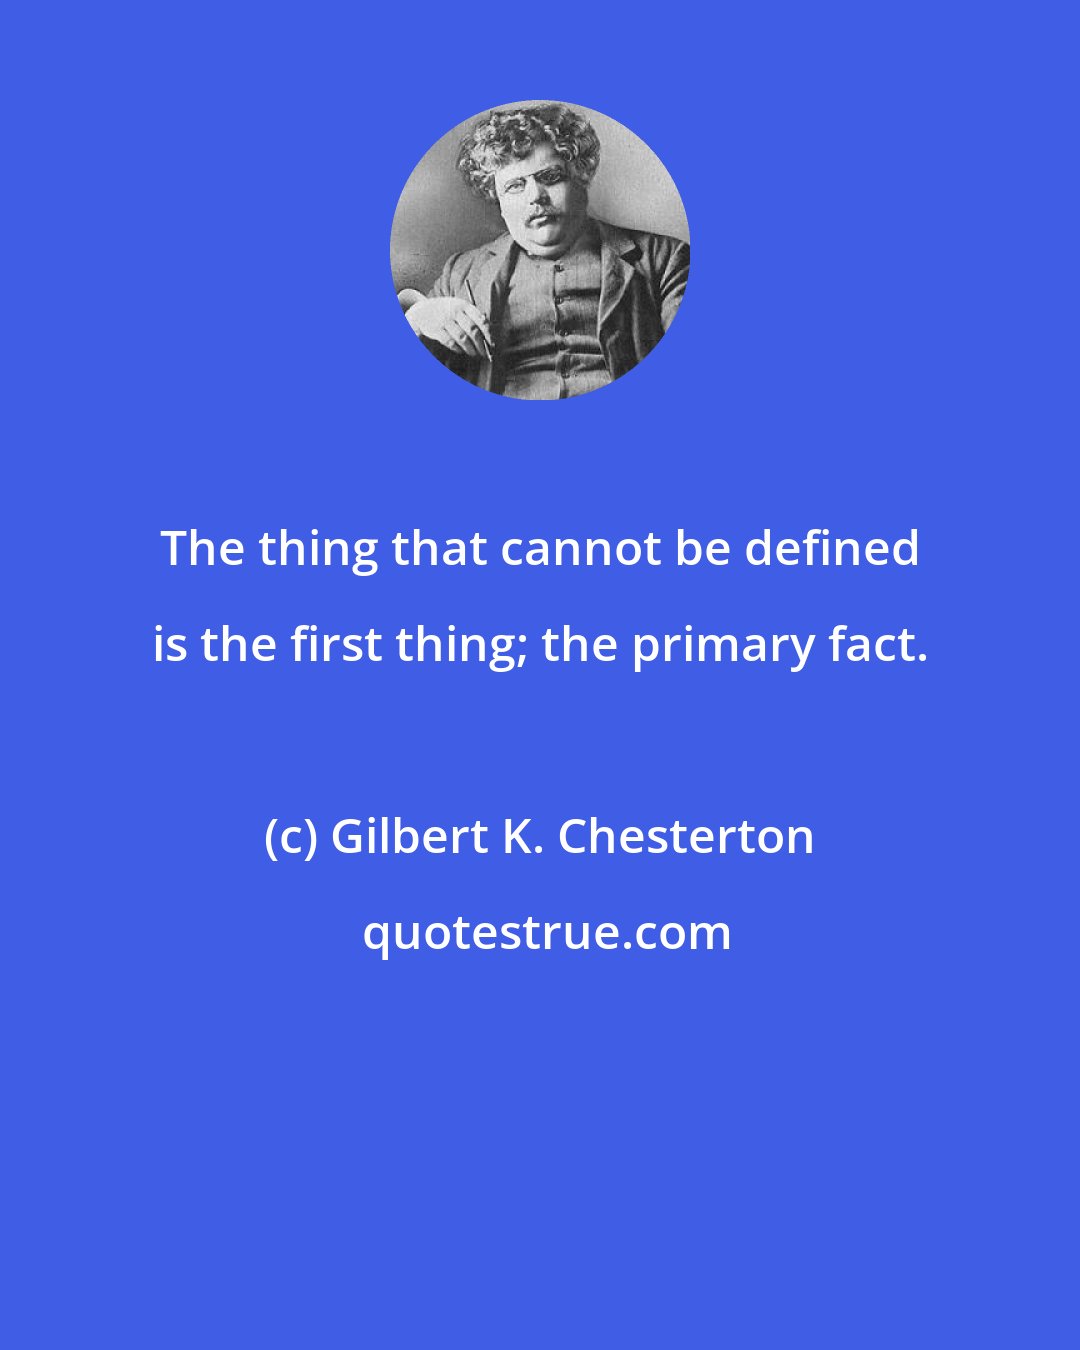 Gilbert K. Chesterton: The thing that cannot be defined is the first thing; the primary fact.